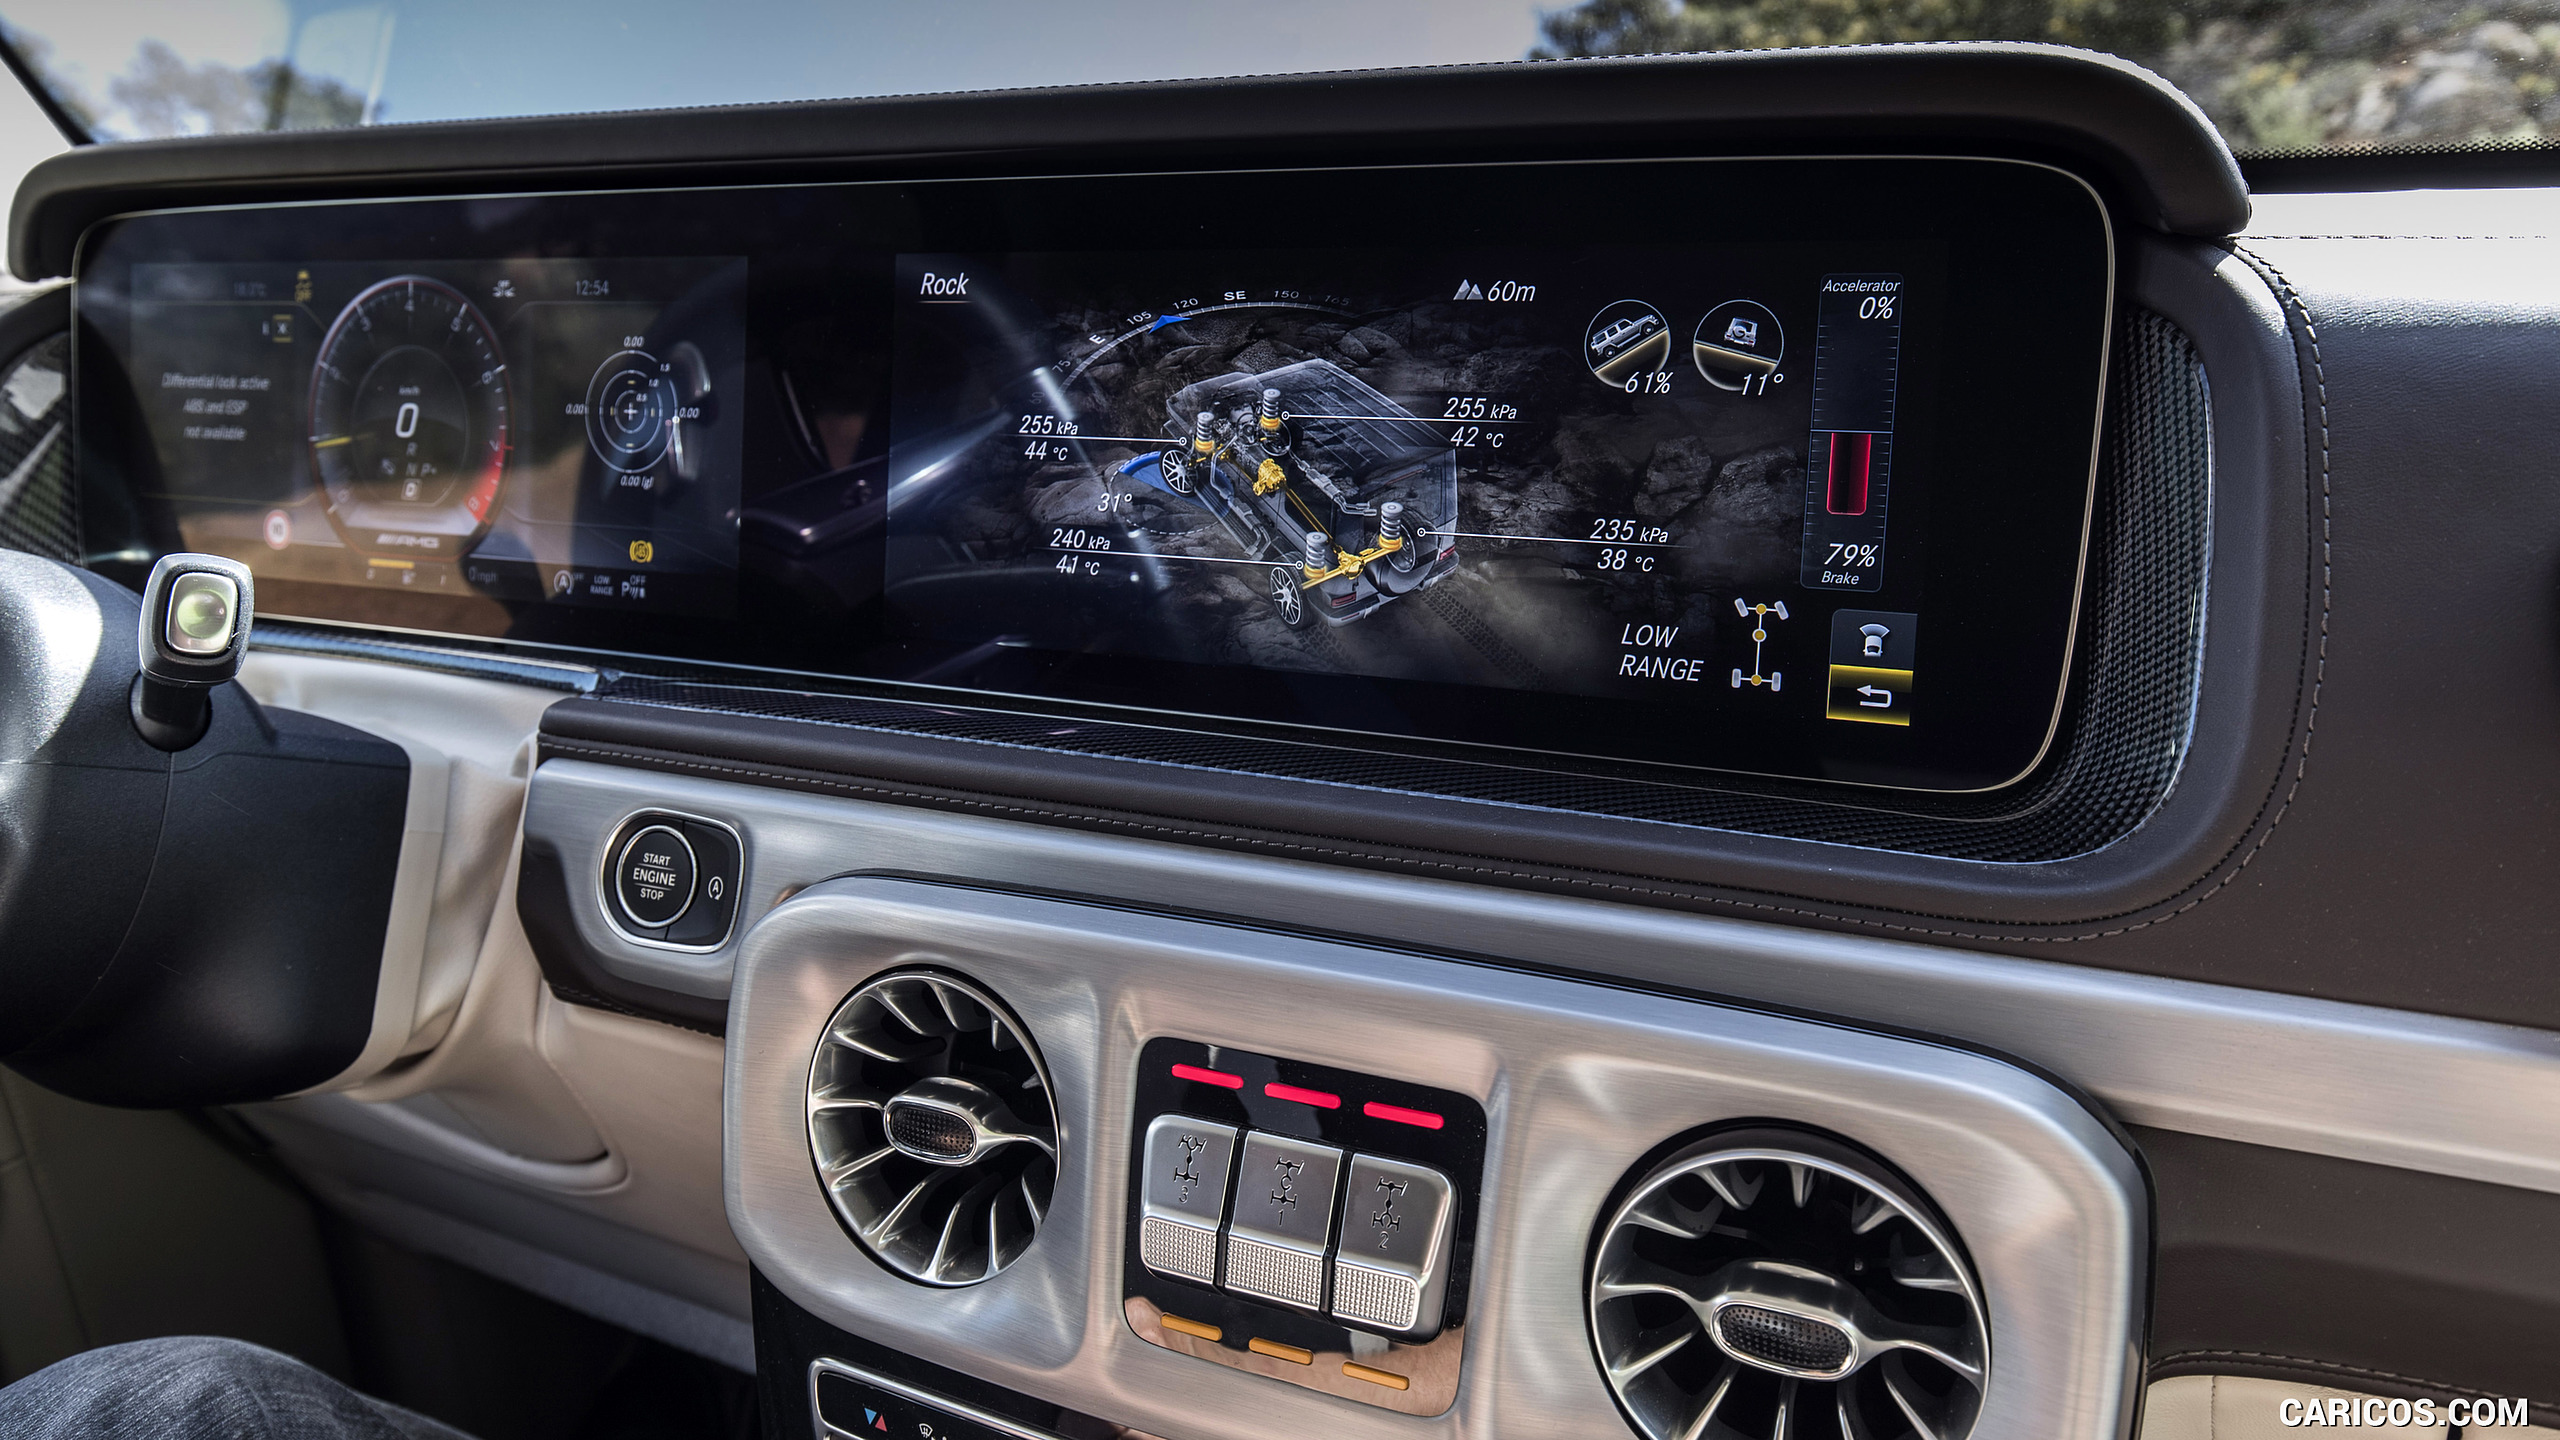 2019 Mercedes-AMG G63 - Central Console, #208 of 452